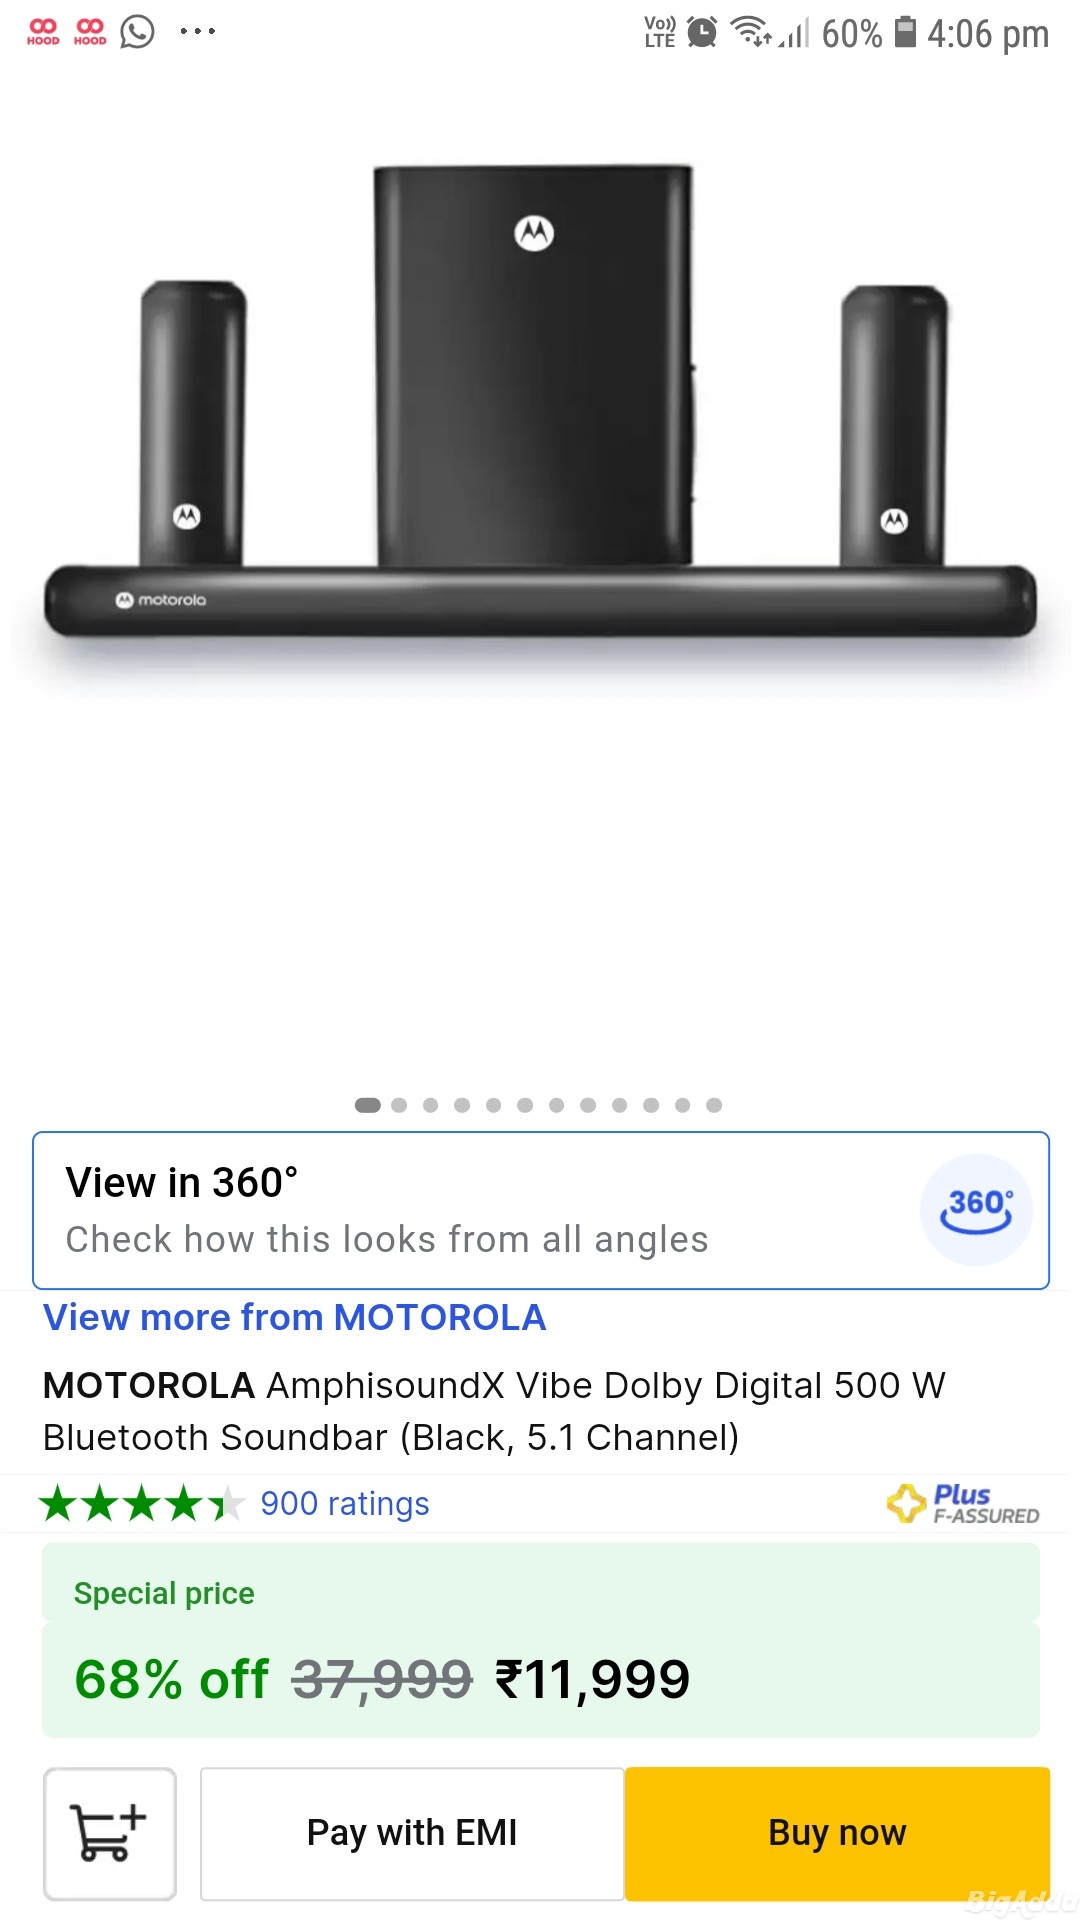 MOTOROLA DOLBY 3D AUDIO SYSTEM FOR SALE